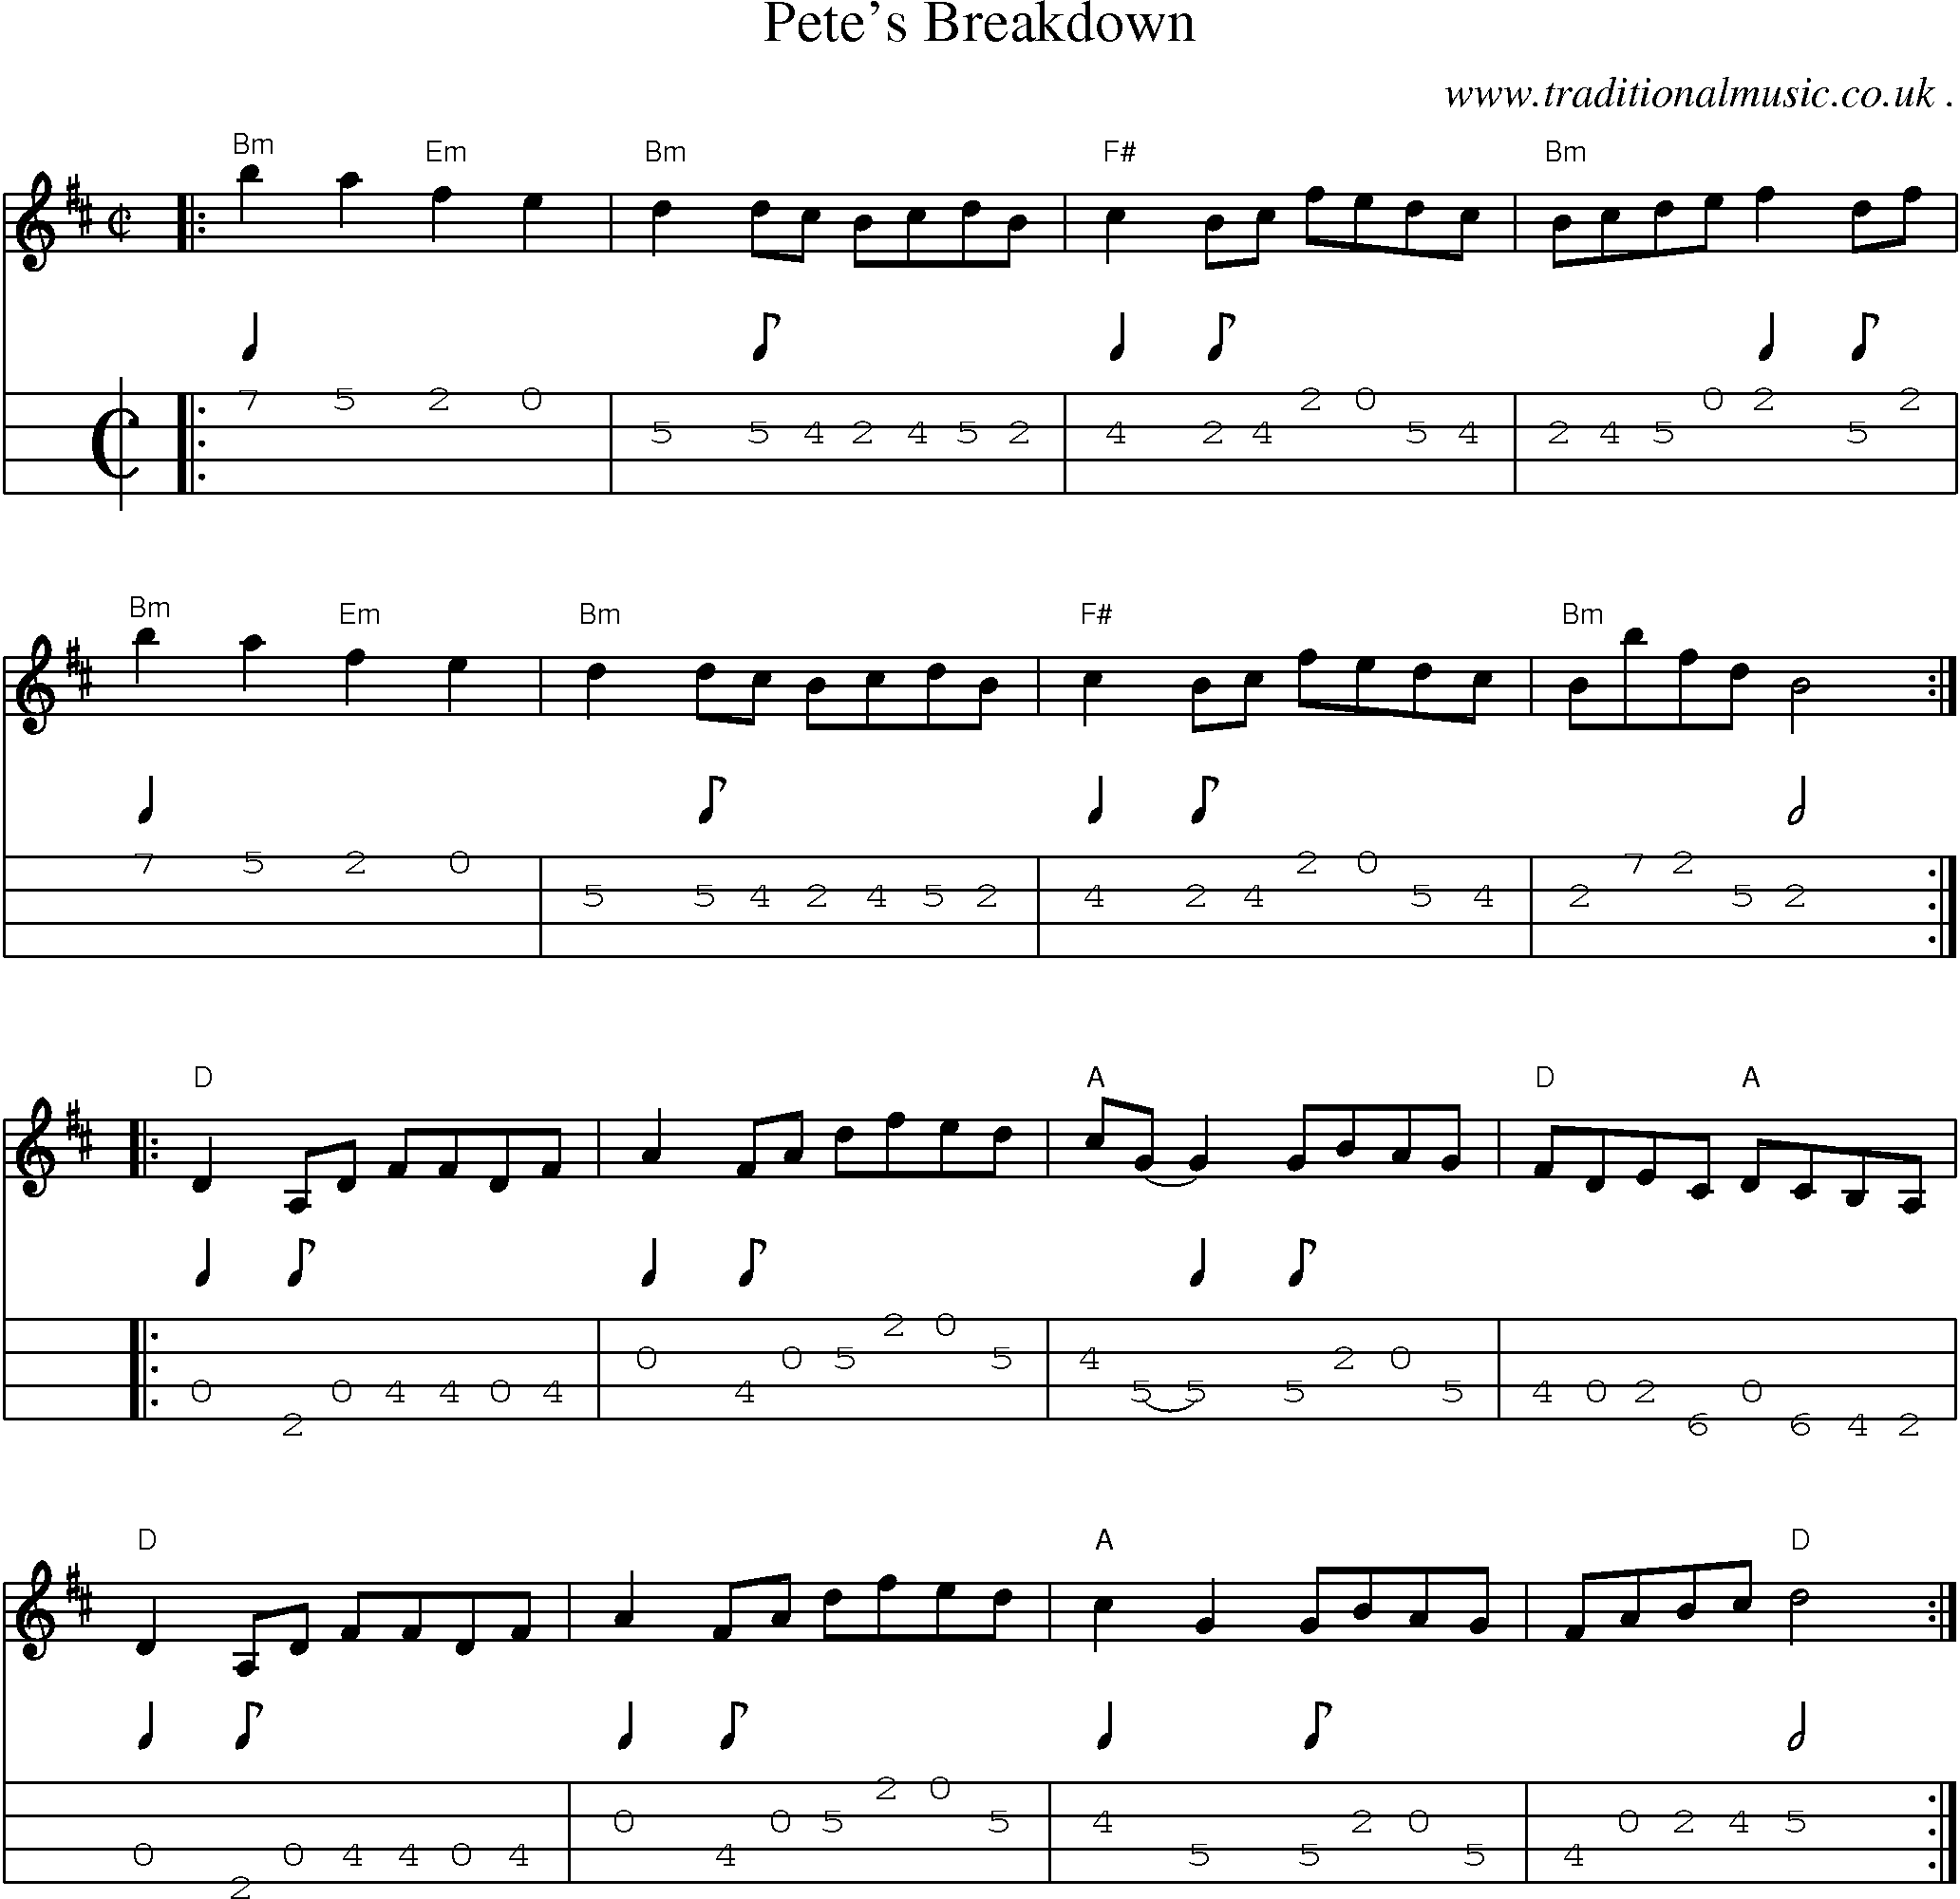 Music Score and Guitar Tabs for Petes Breakdown